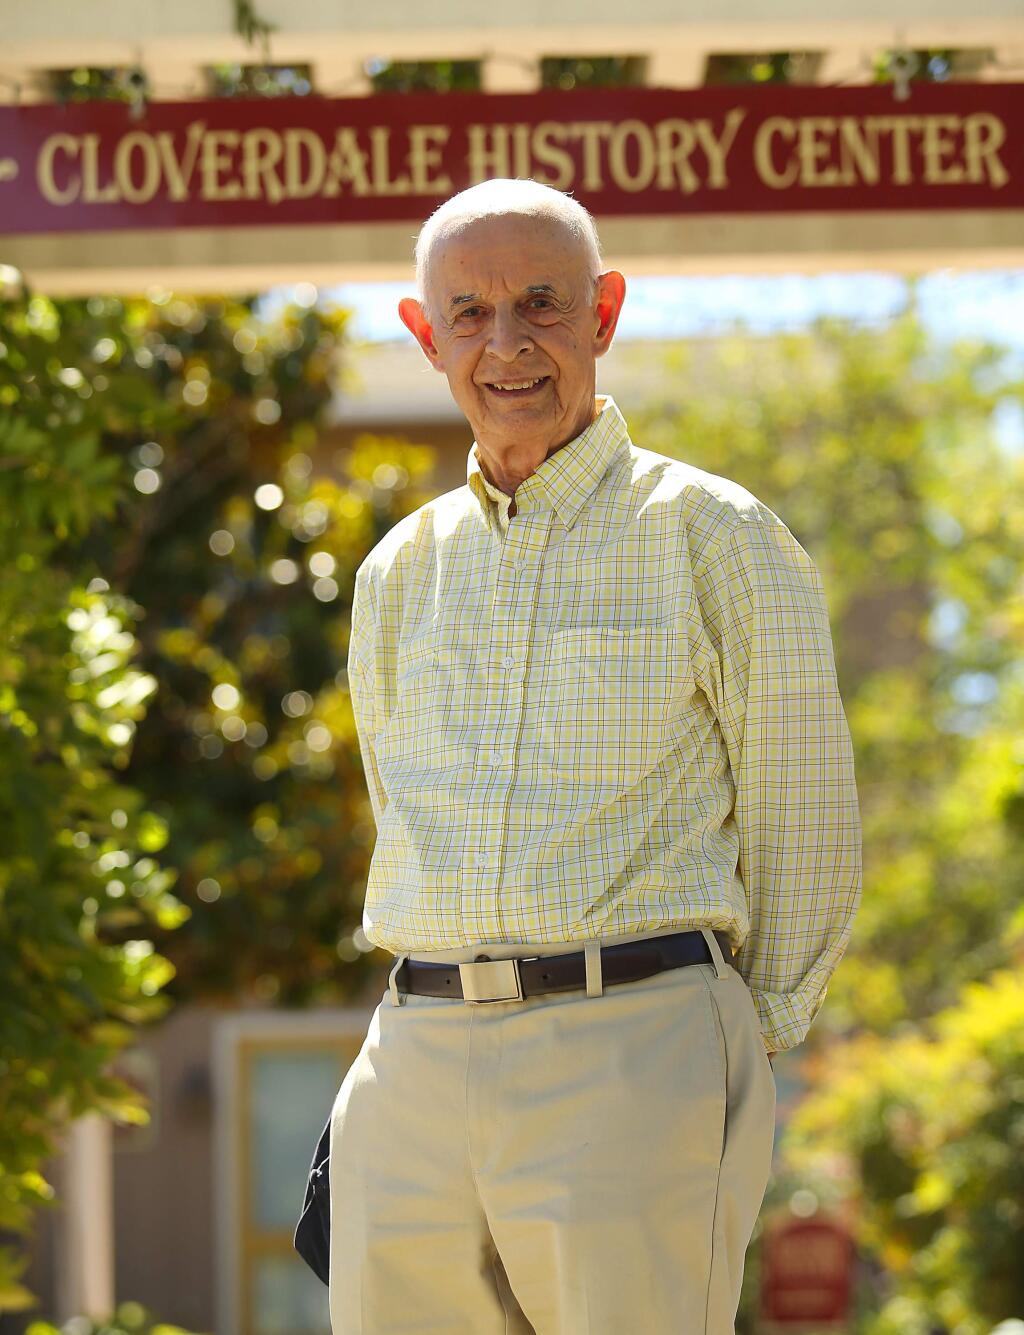 Joaquin Espinosa is the force behind the Cloverdale History Center's speaker series. (JOHN BURGESS / The Press Democrat)